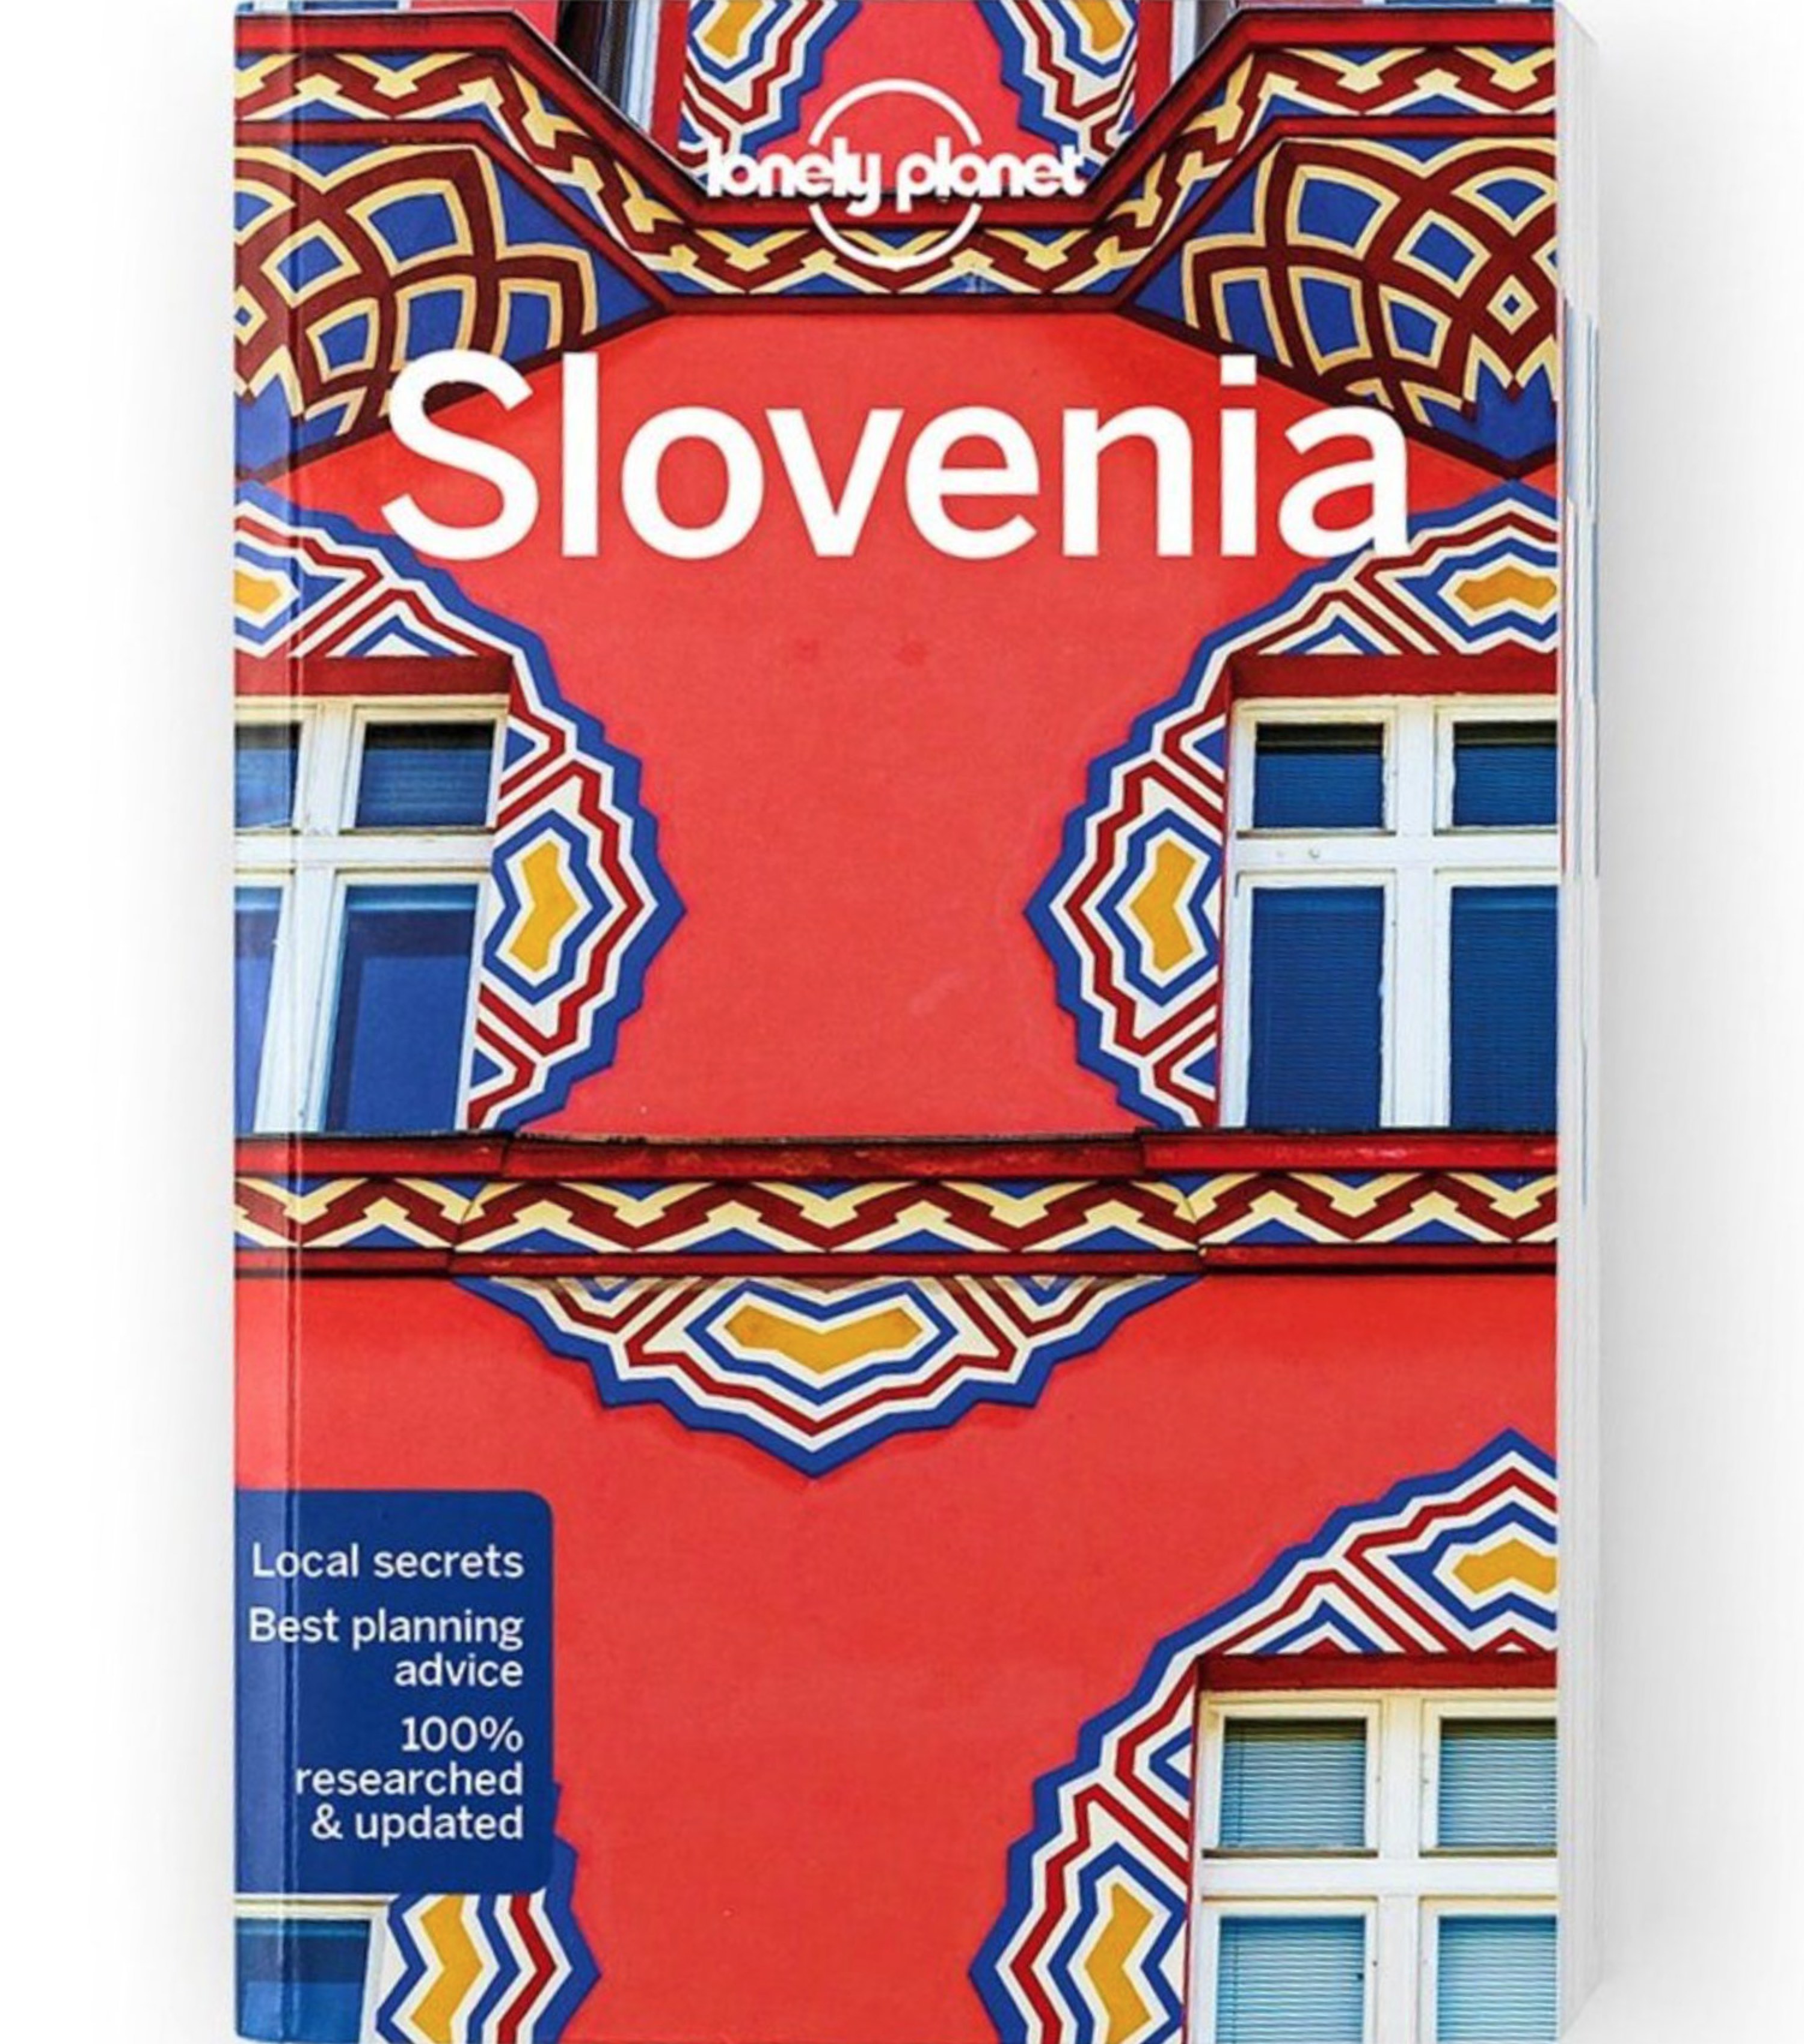 Lonely　Lonely　Planet　Planet　by　Slovenia　10th　Edition　(9781788680578)